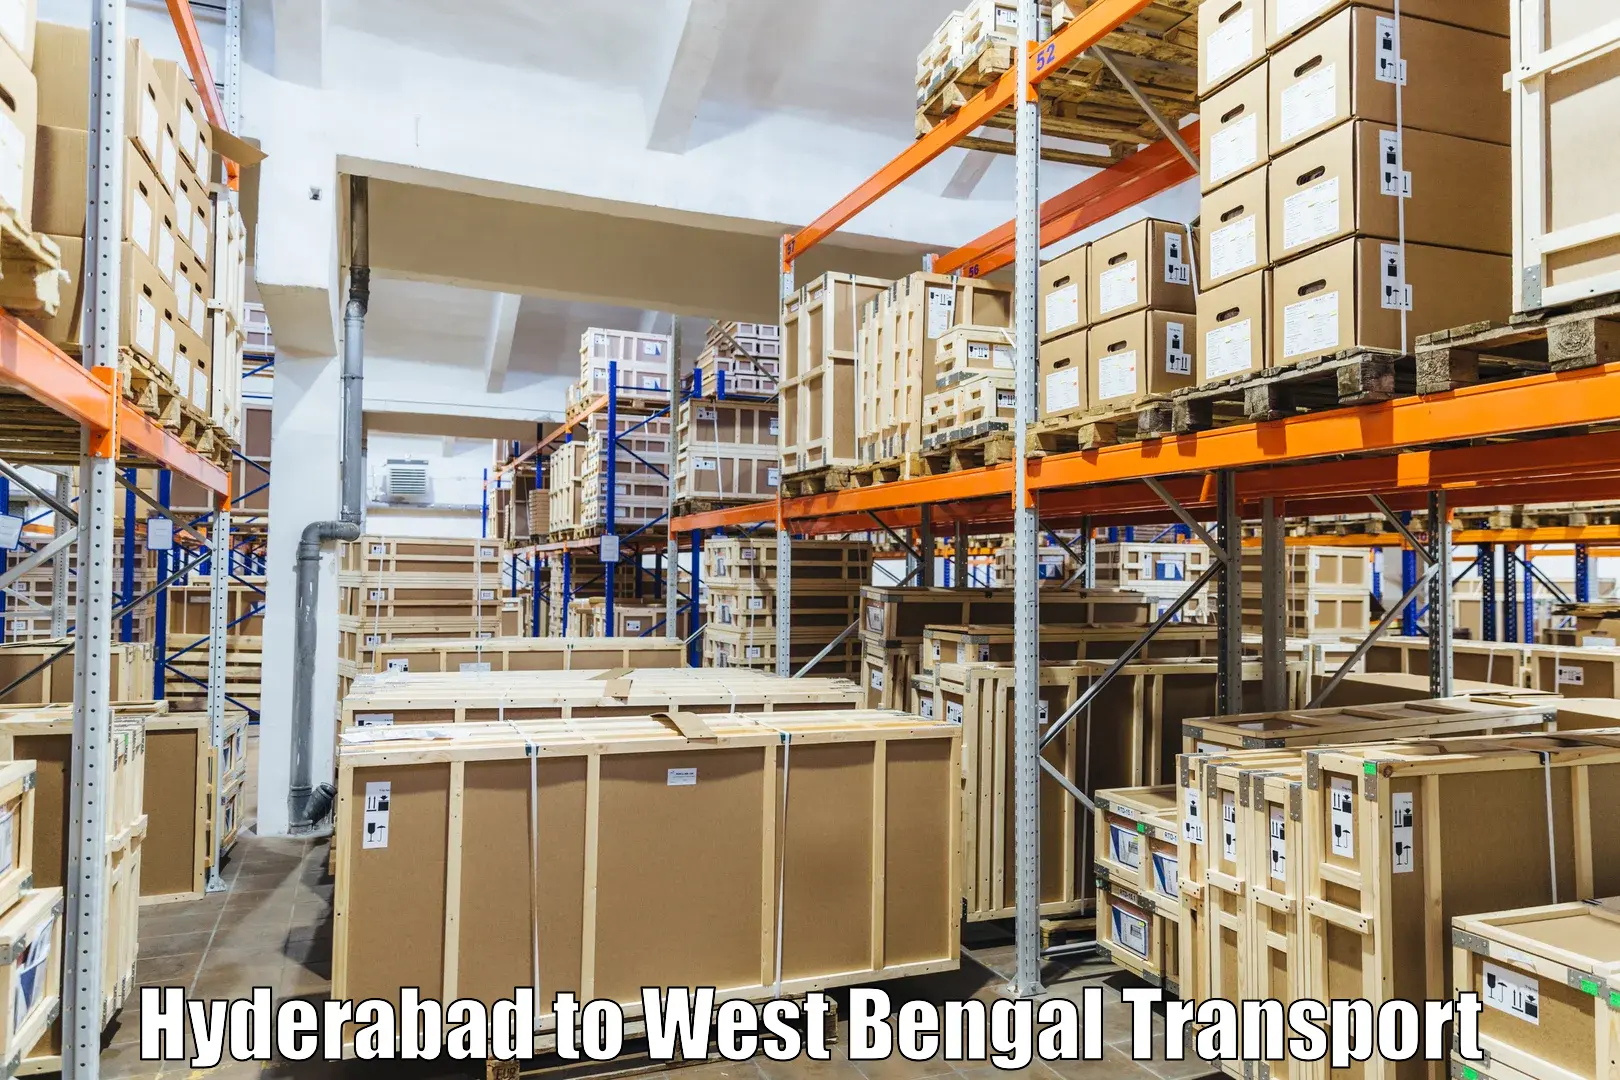 Truck transport companies in India Hyderabad to West Bengal